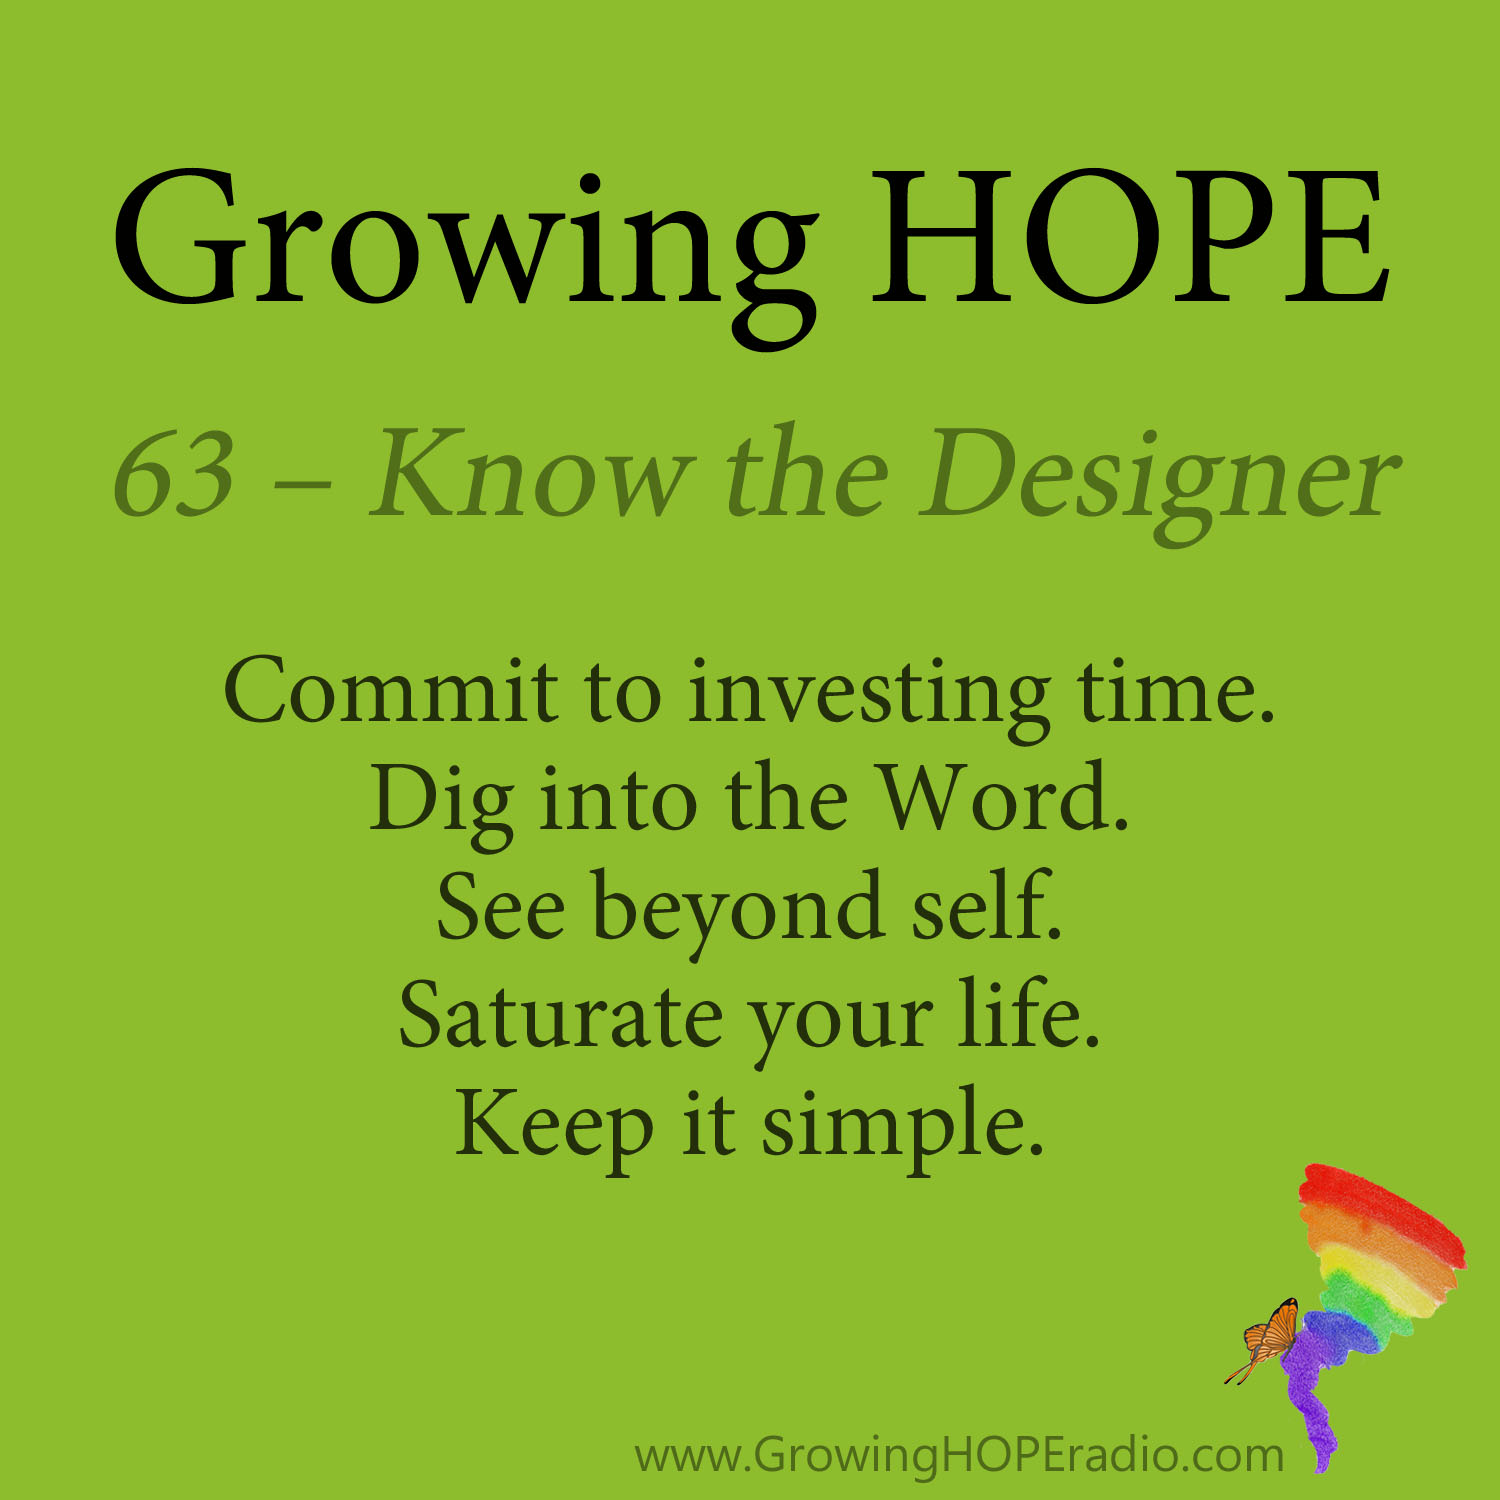 #GrowingHOPE daily - 5 points - 63 - know the designer